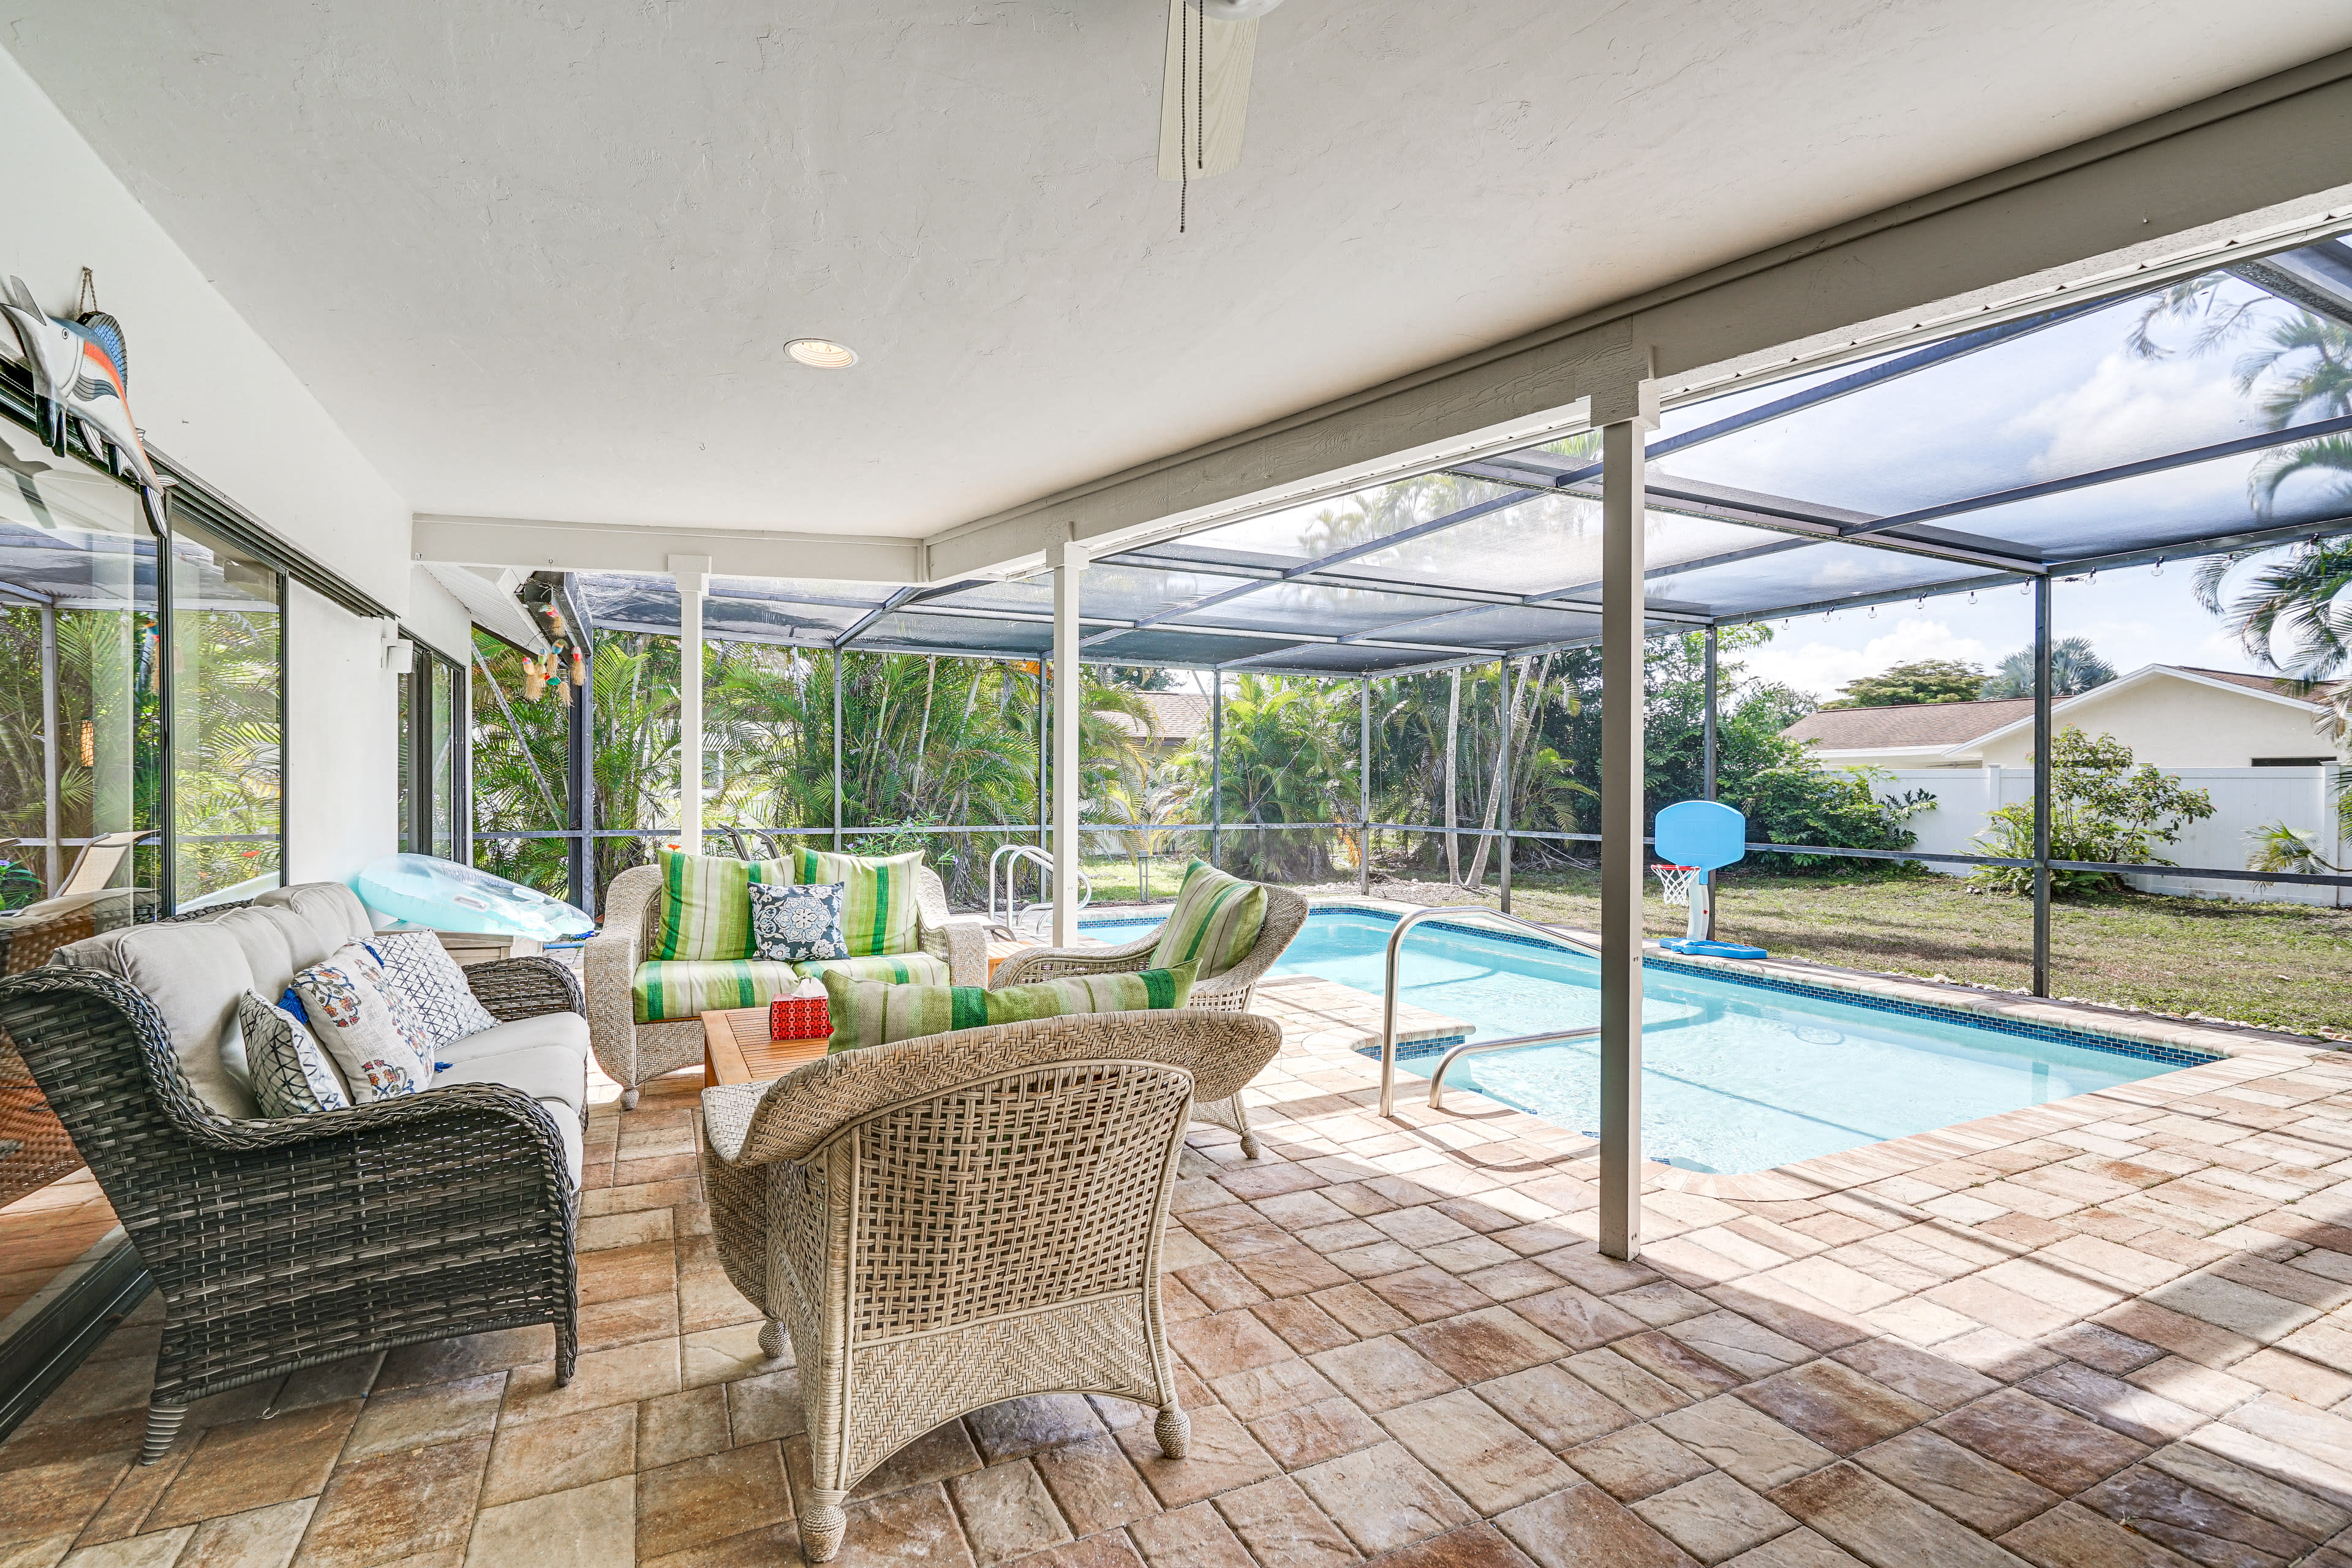 Covered Patio | Outdoor Seating Area | Private Pool